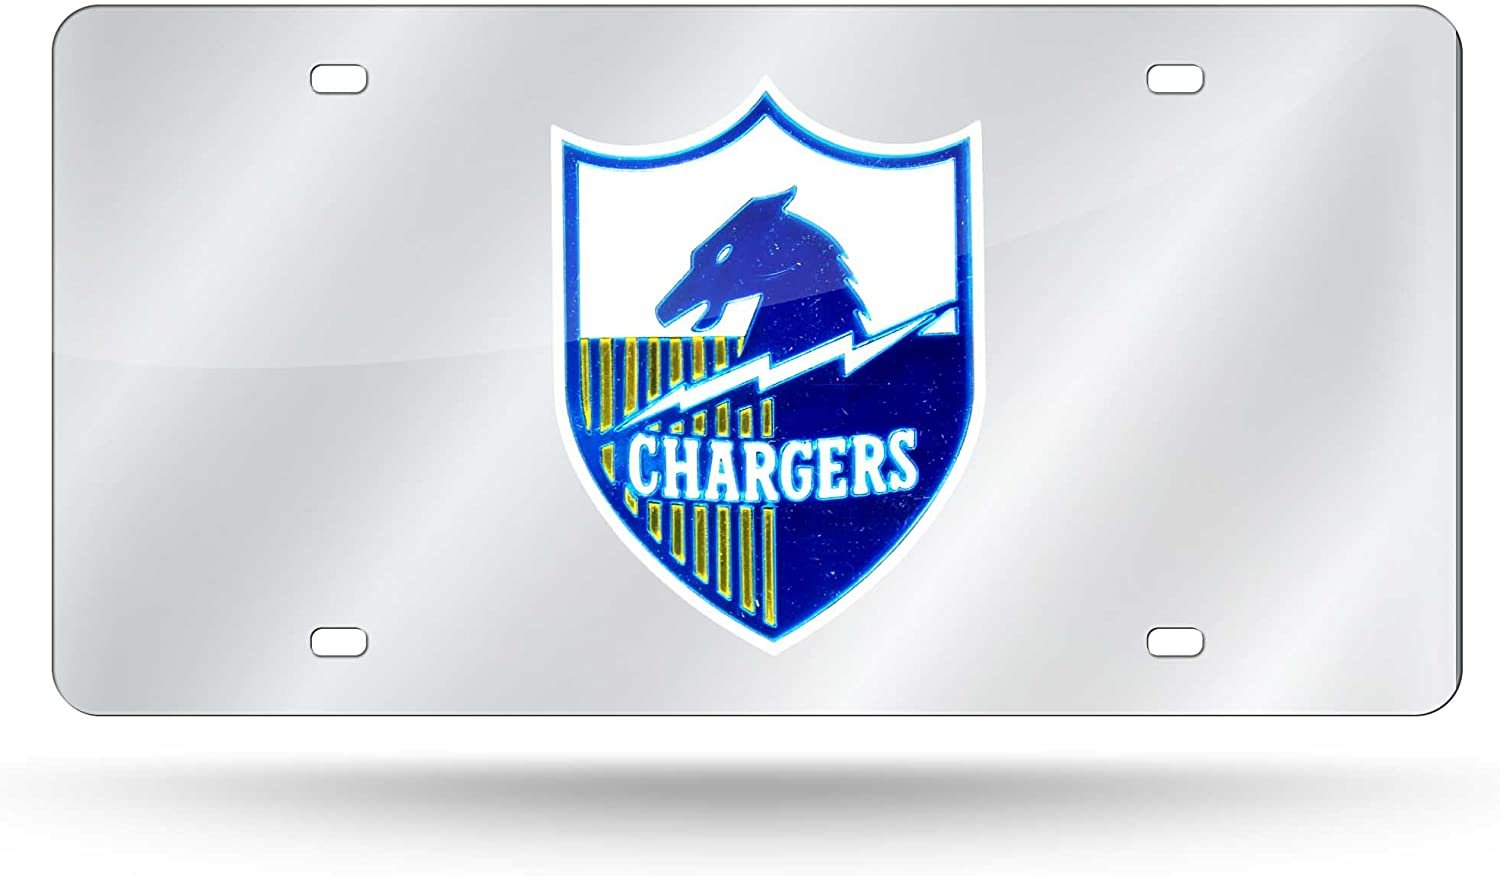 Los Angeles Chargers Premium Laser Cut Tag License Plate, Afl Retro Logo, Mirrored Acrylic Inlaid, 12x6 Inch